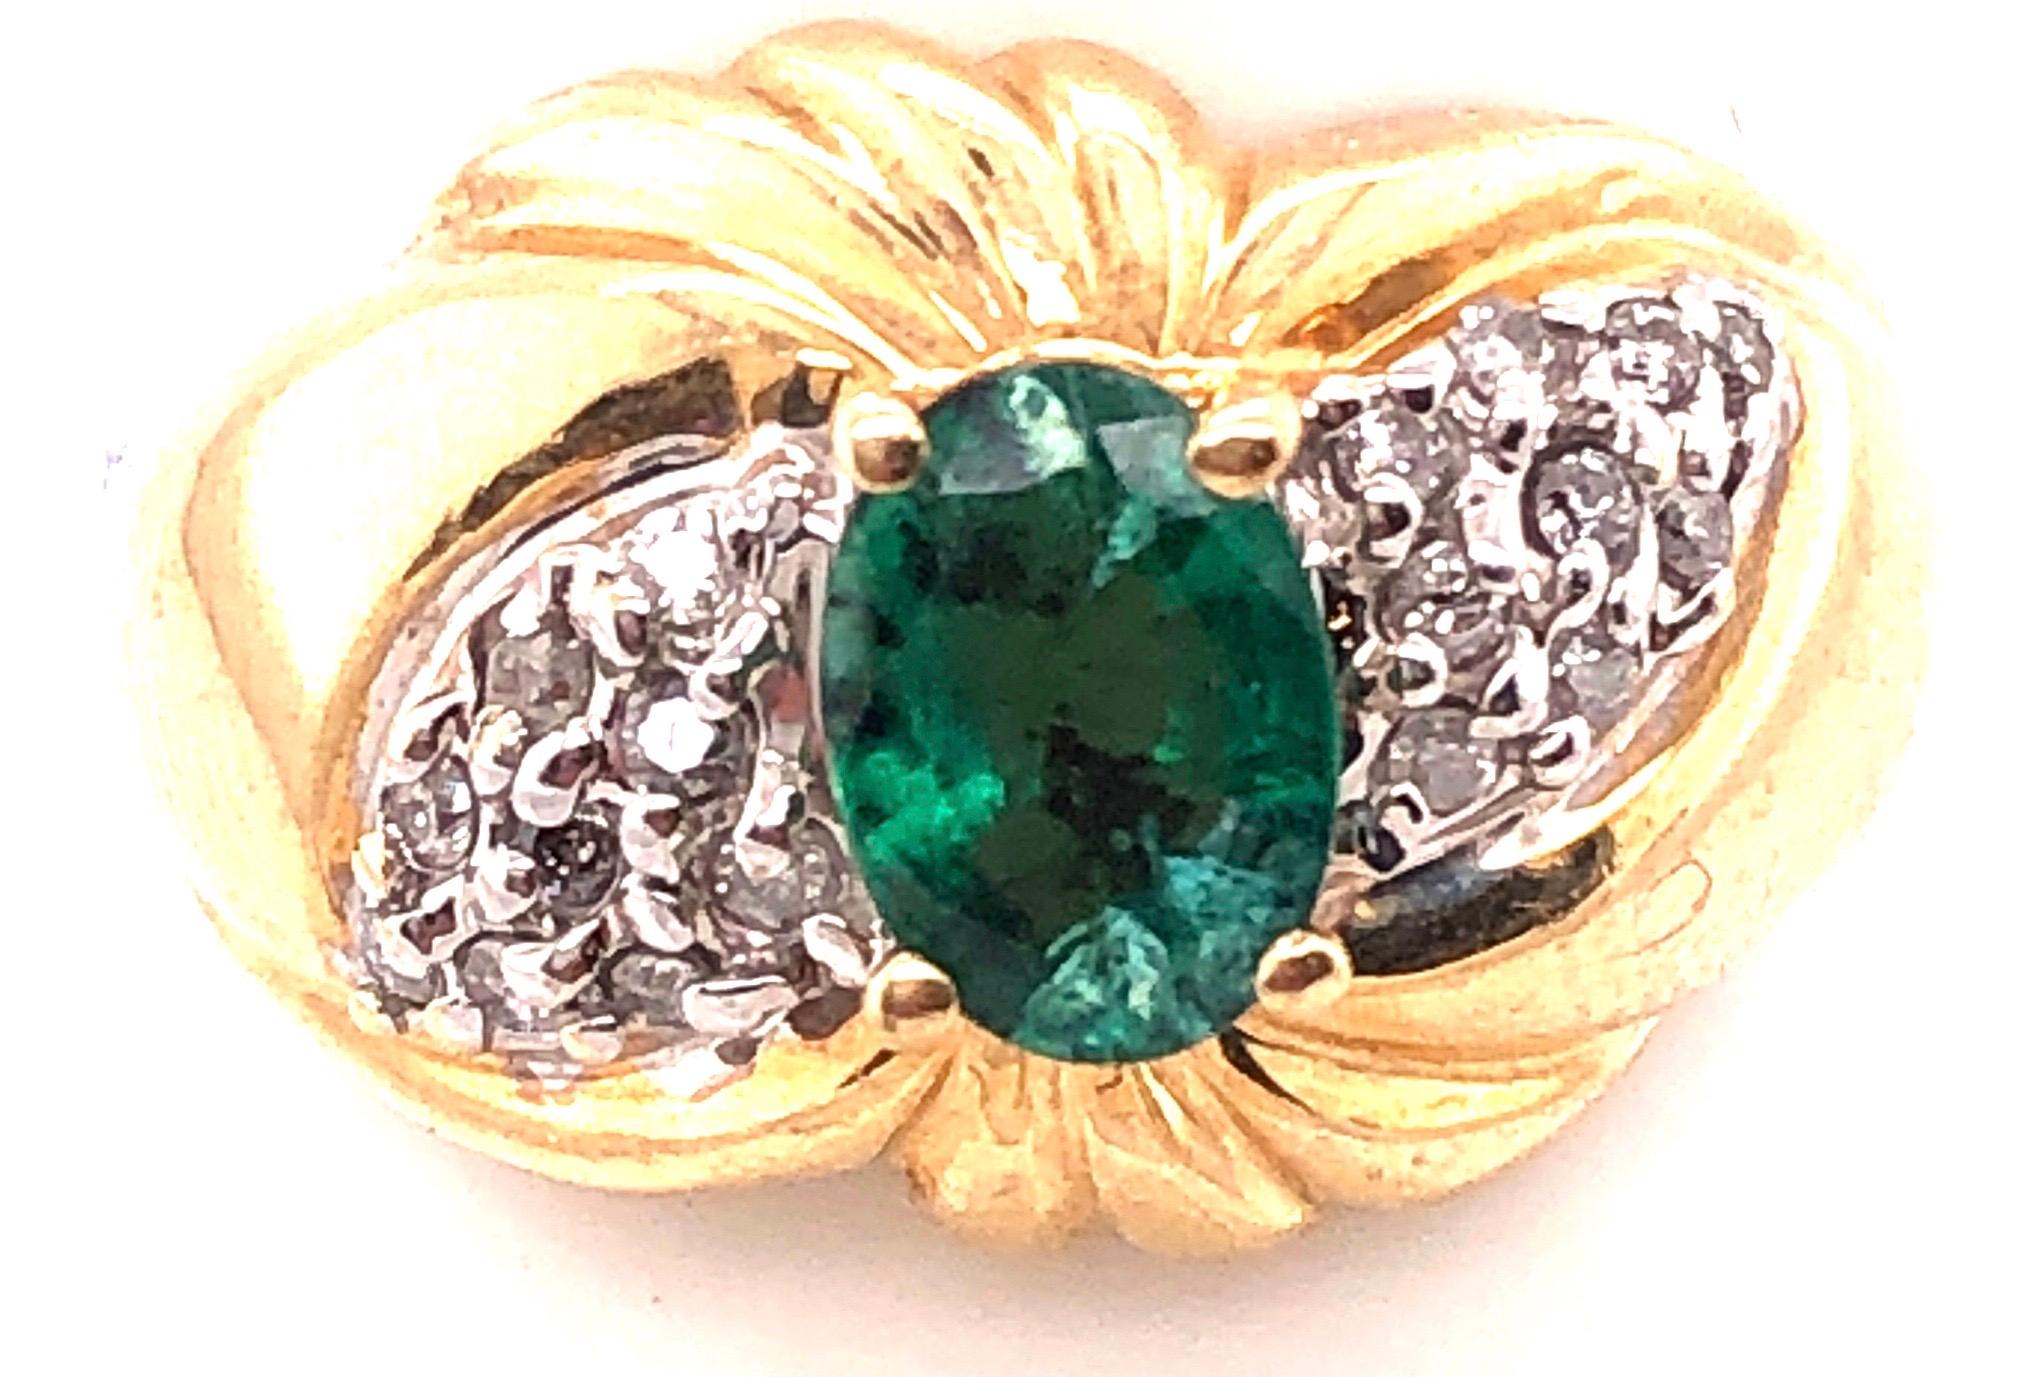 Two Tone Gold ADL Marked Antique Ring with Emerald and Diamonds.
Size 6.5
4.2 grams total weight.